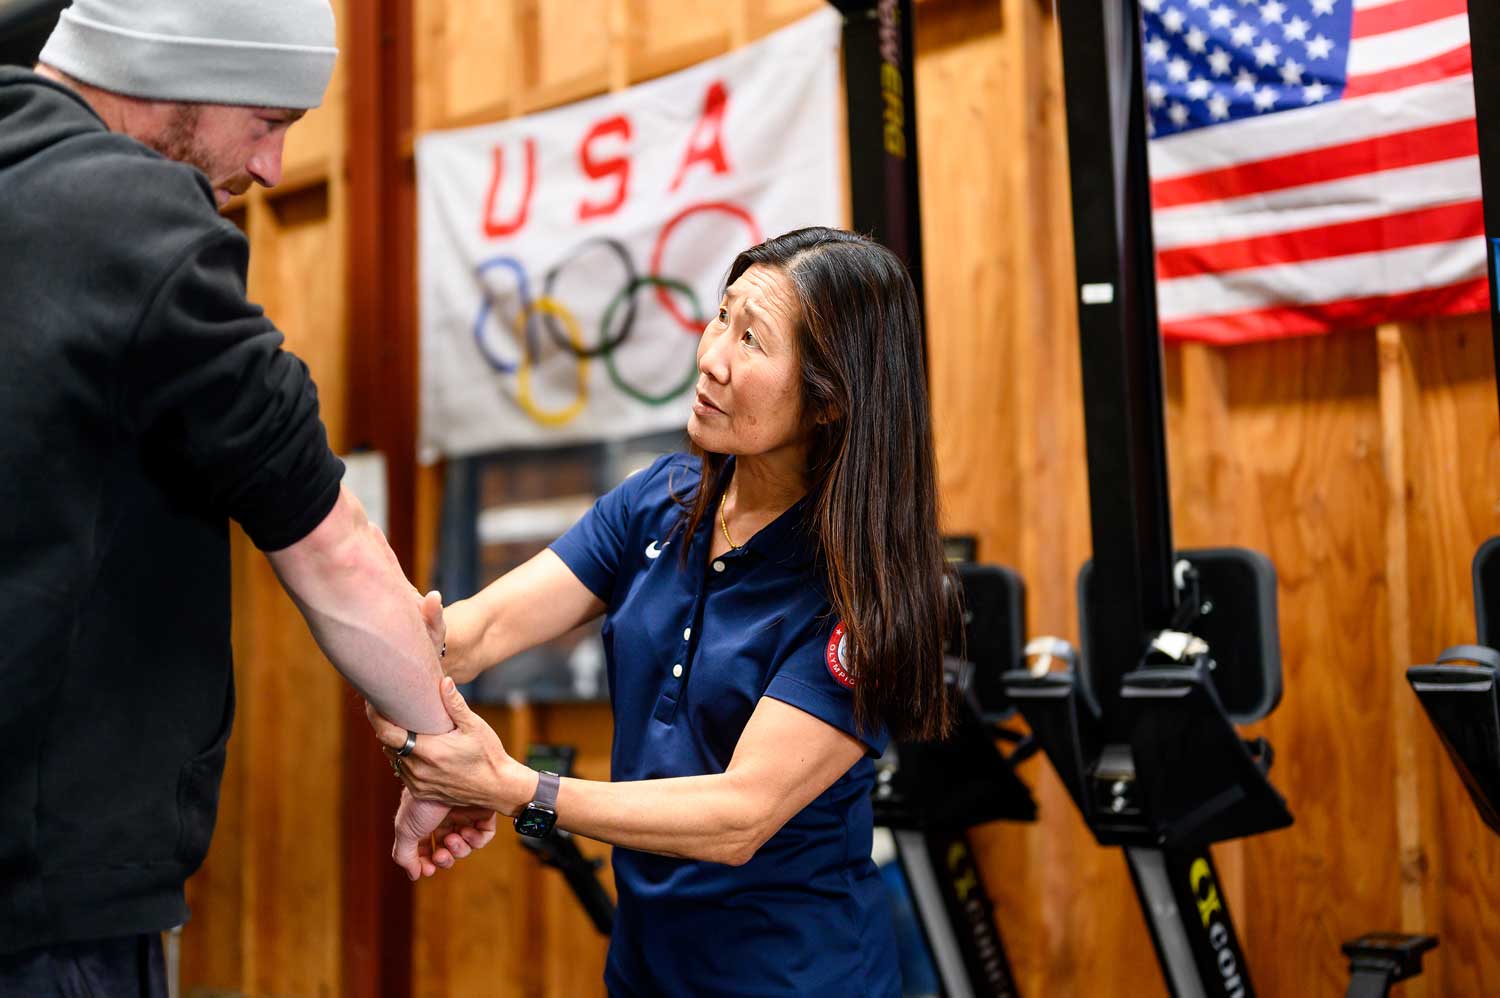 Ben Davison, left, receives physical therapy on his arm from Dr. Cindy Cang, right. On a wall in the background are an American flag and a Team USA Olympic flag.